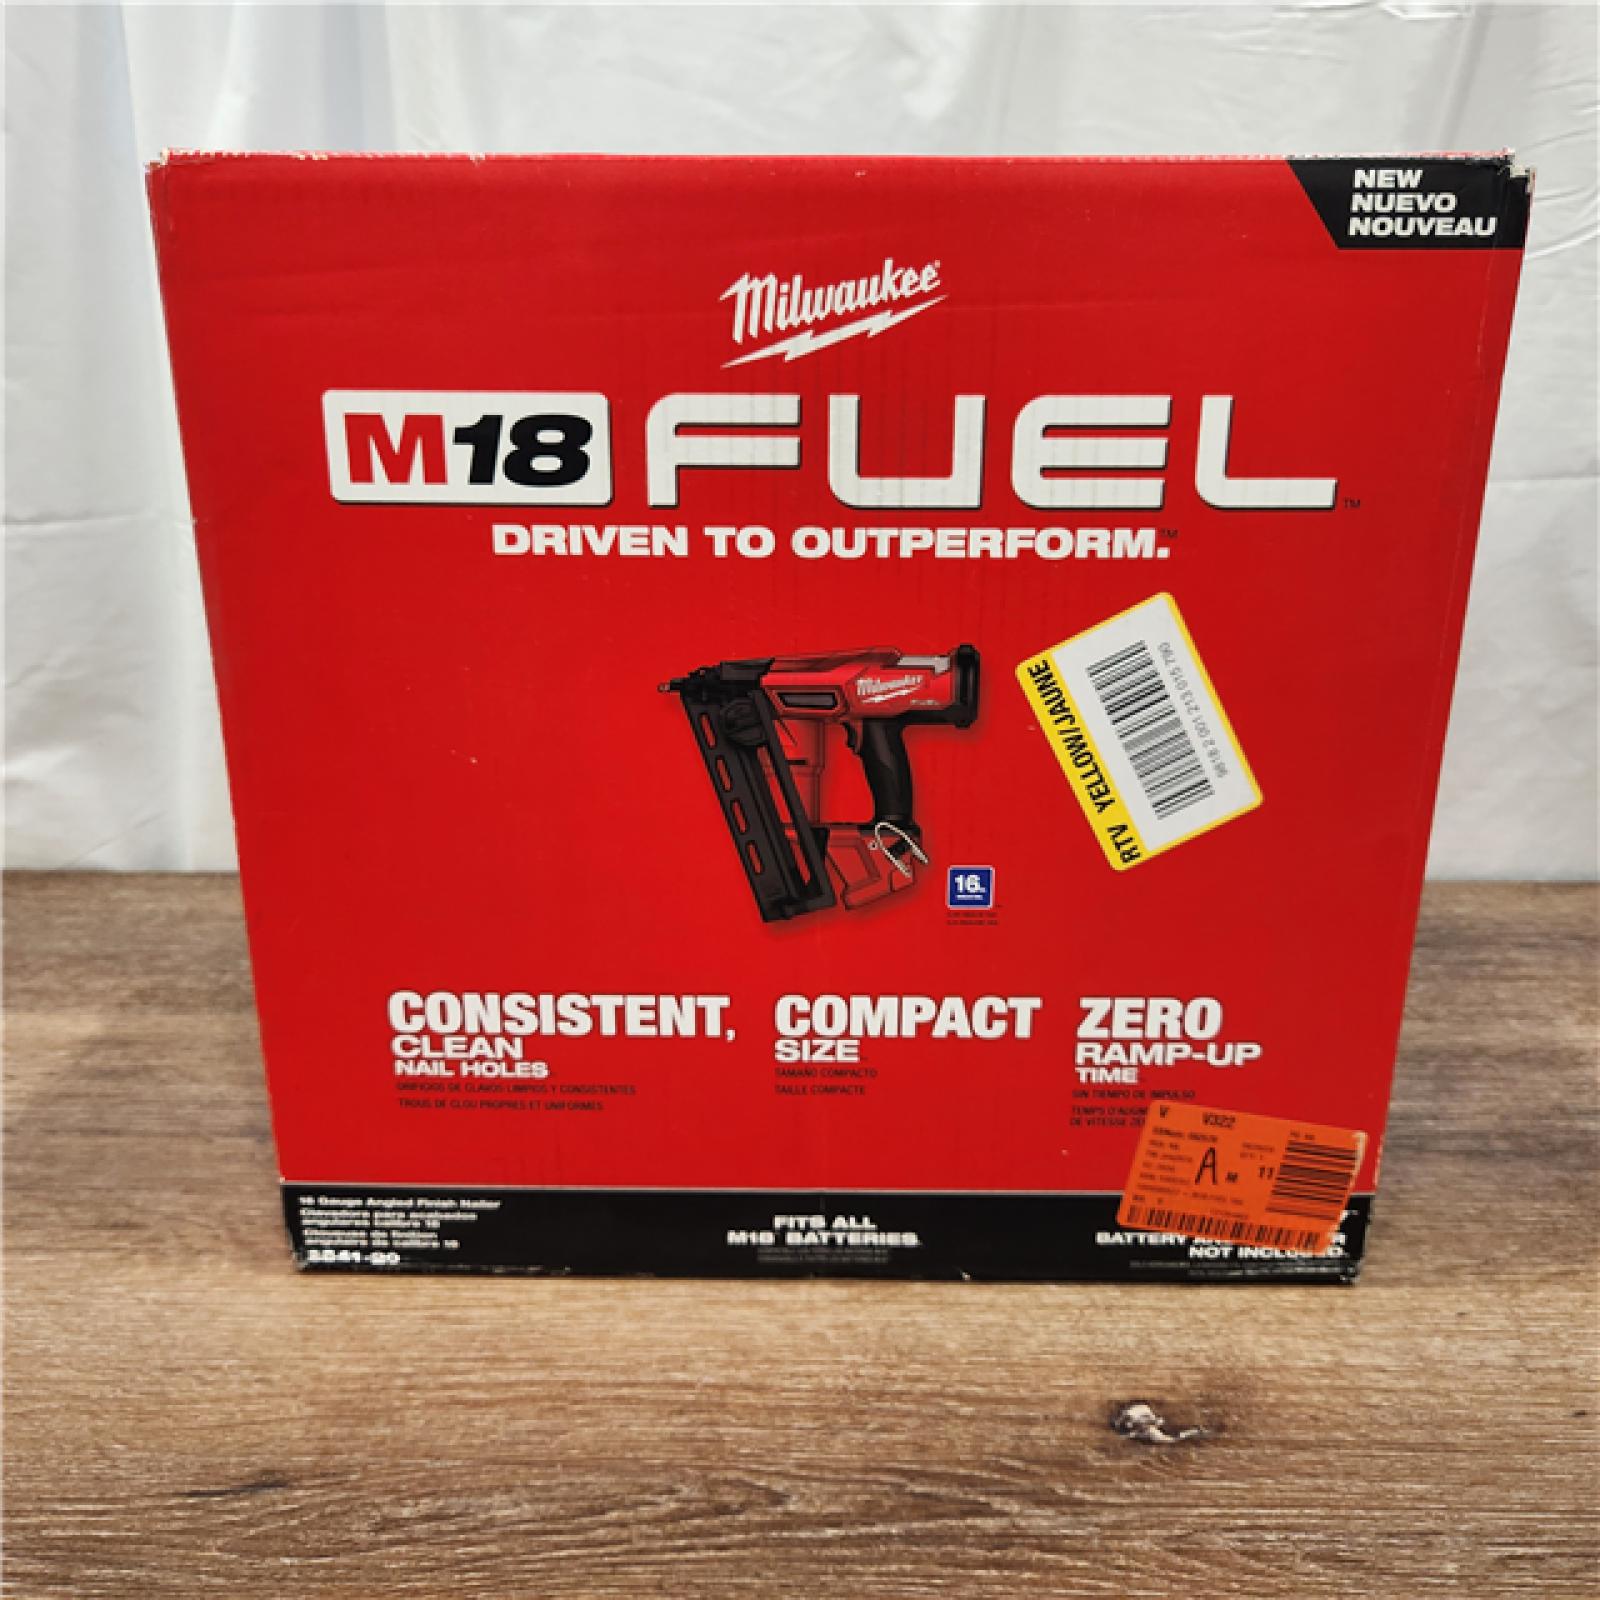 AS-IS M18 FUEL 18-Volt Lithium-Ion Brushless Cordless Gen II 16-Gauge Angled Finish Nailer (Tool-Only)